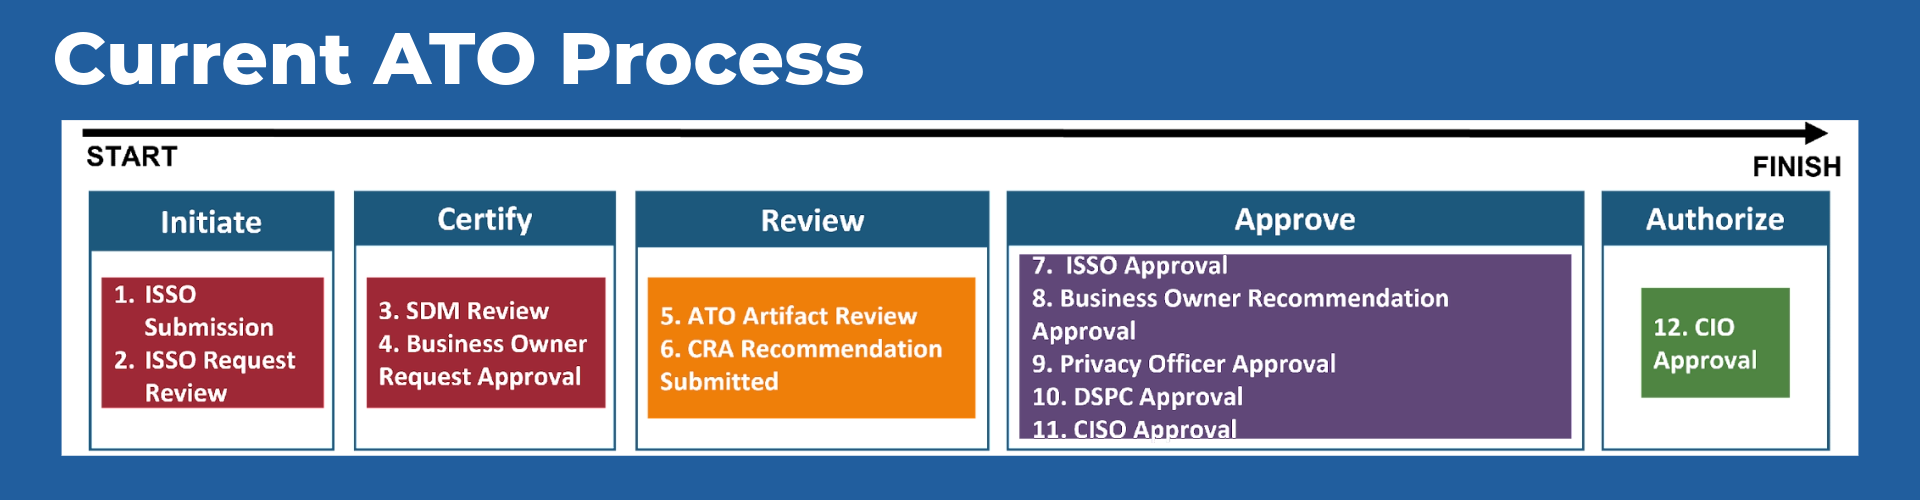 Graphic outlining current ATO process. From left to right: 1) Initiate (ISSO Submission and Request Review 2) Certify (SDM Review and Business Owner Request Approval) 3) Review (ATO Artifact Review and CRA Recommendation Submitted) 4) Approve (ISSO Approval, Business Owner Recommendation Approval, Privacy Officer Approval, DSPC Approval, CISO Approval) 5) Authorize (CIO Approval).